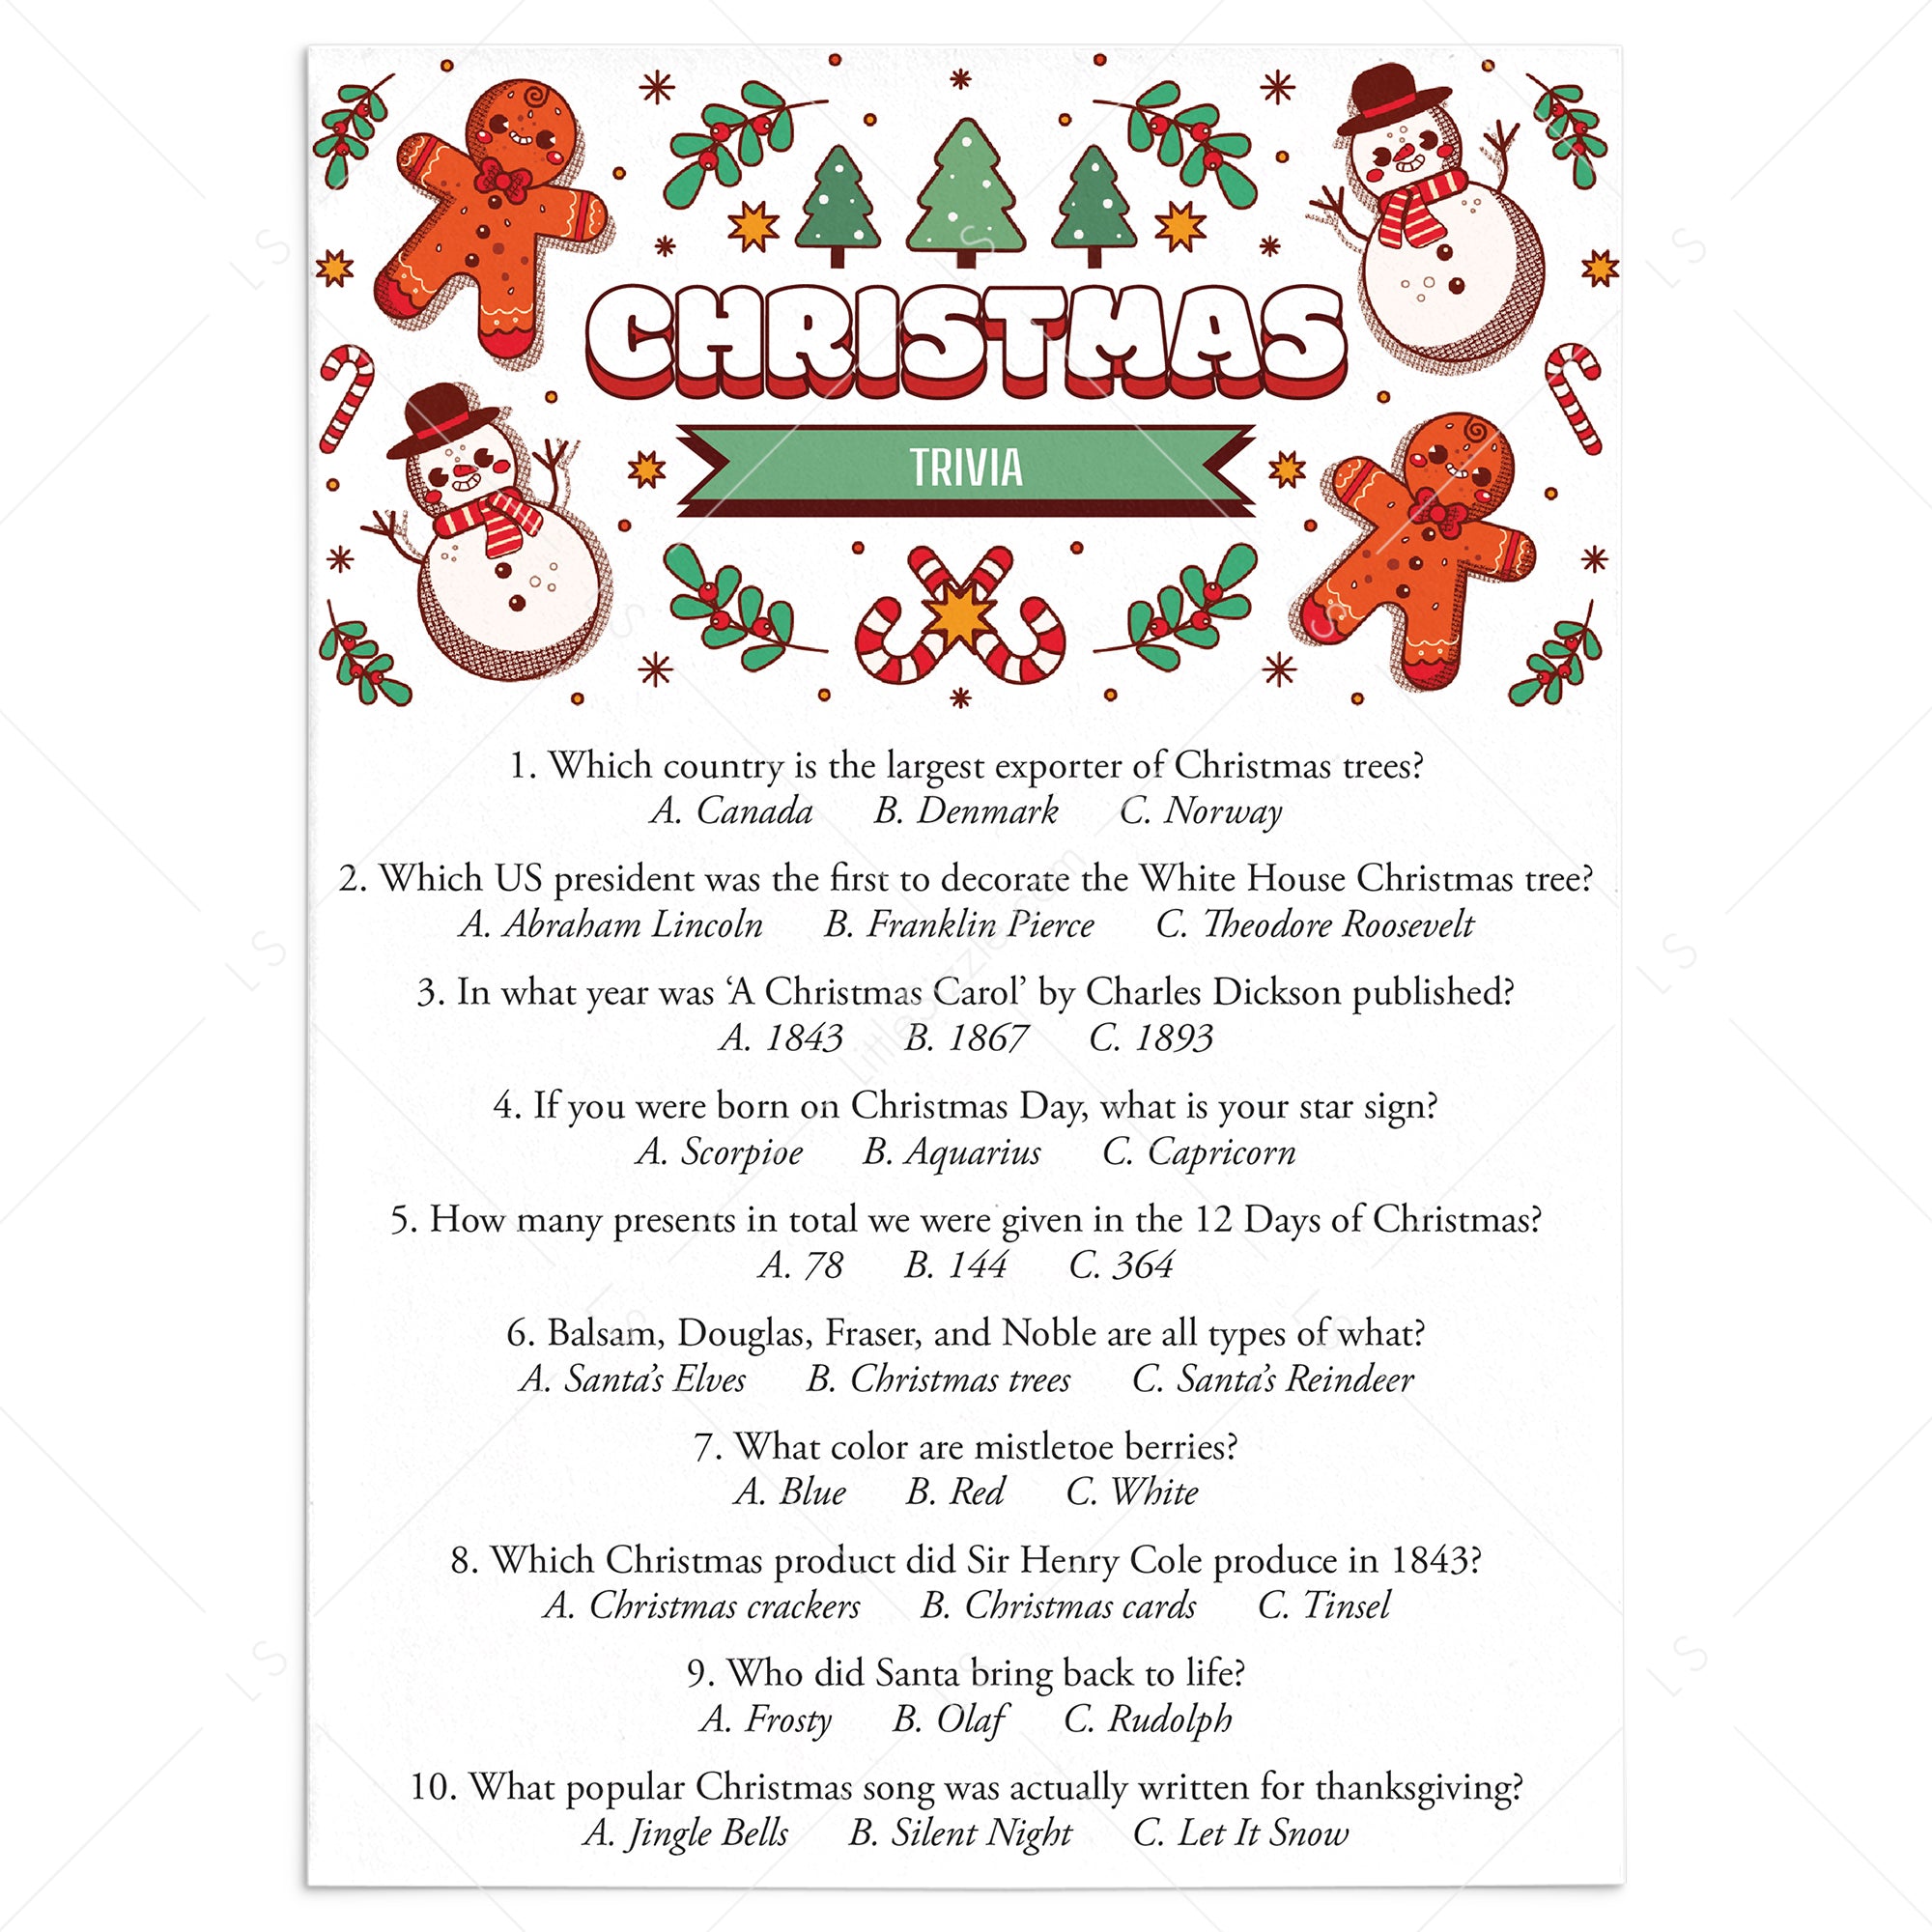 Test Your Christmas Song Knowledge with this Fun Game